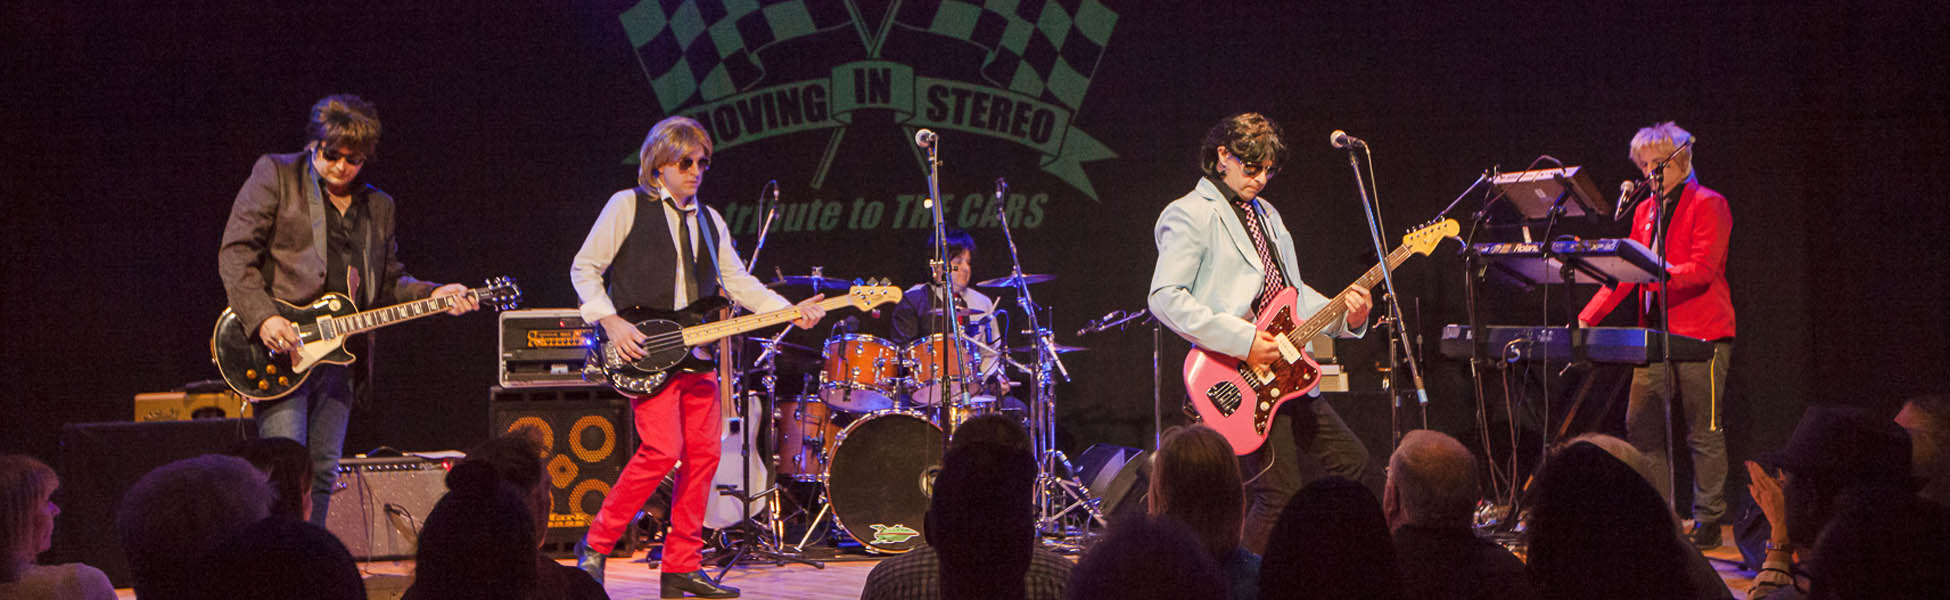 Moving In Stereo - Cars Tribute Band